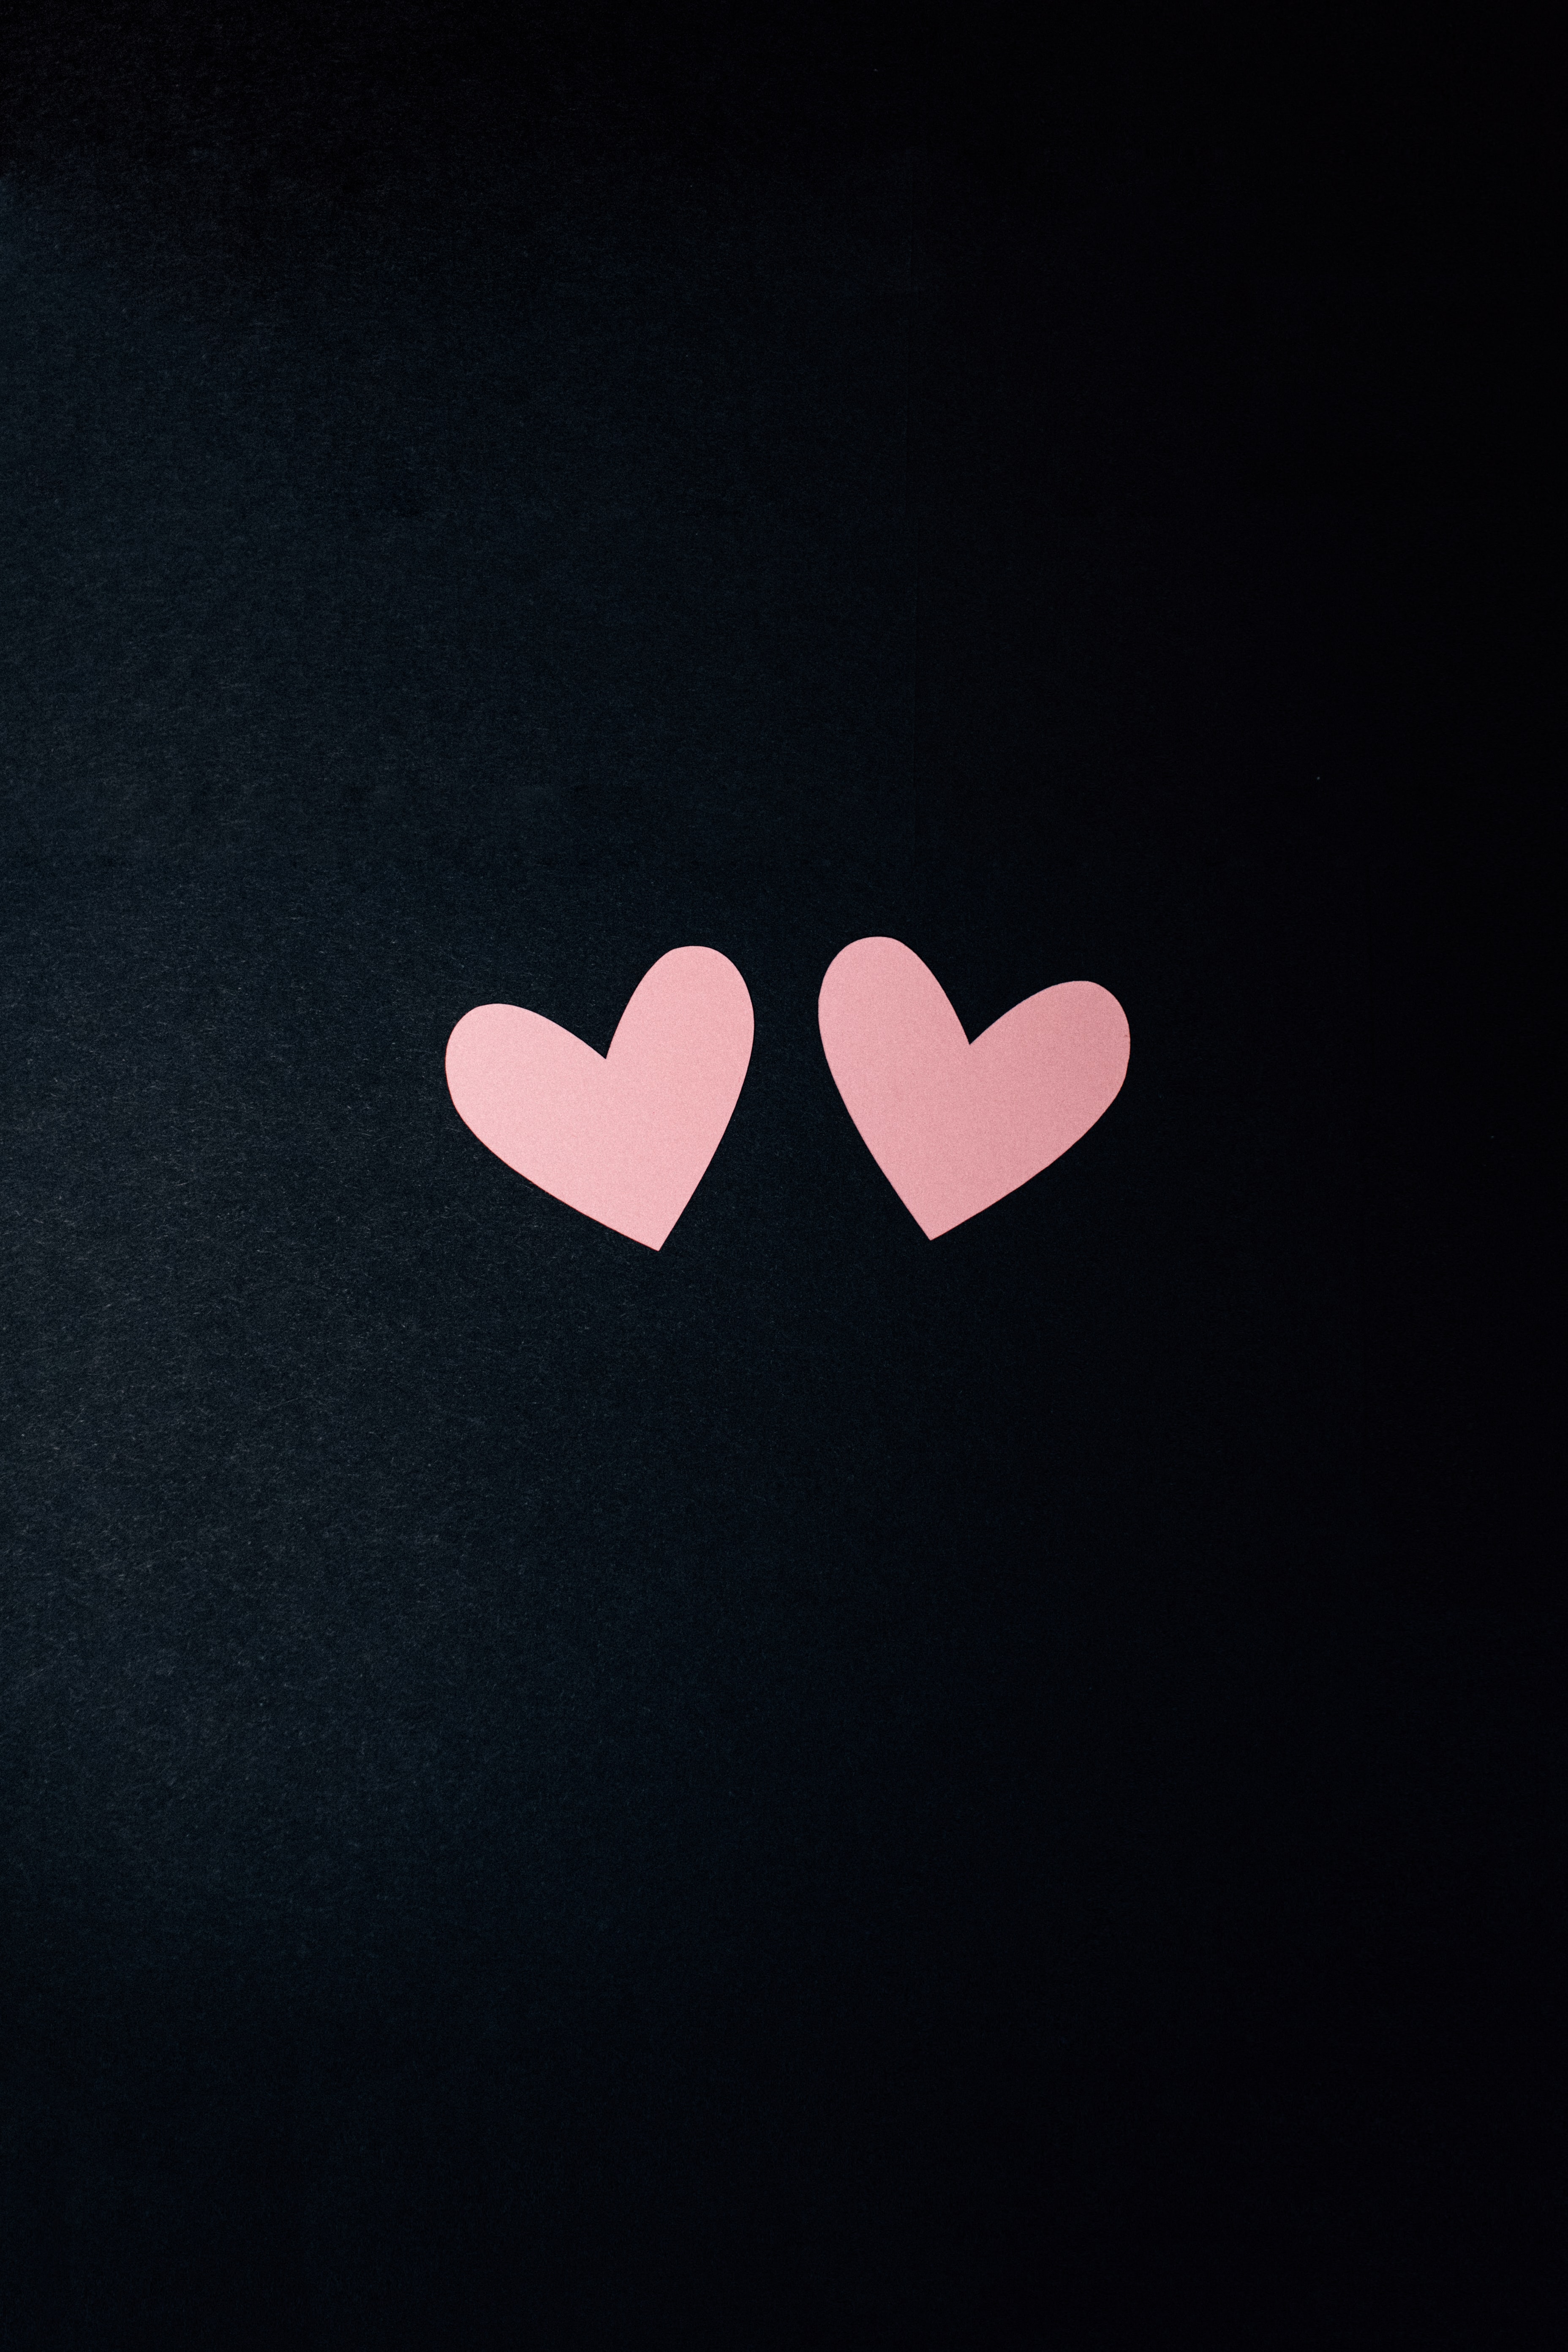 Free Hearts Background